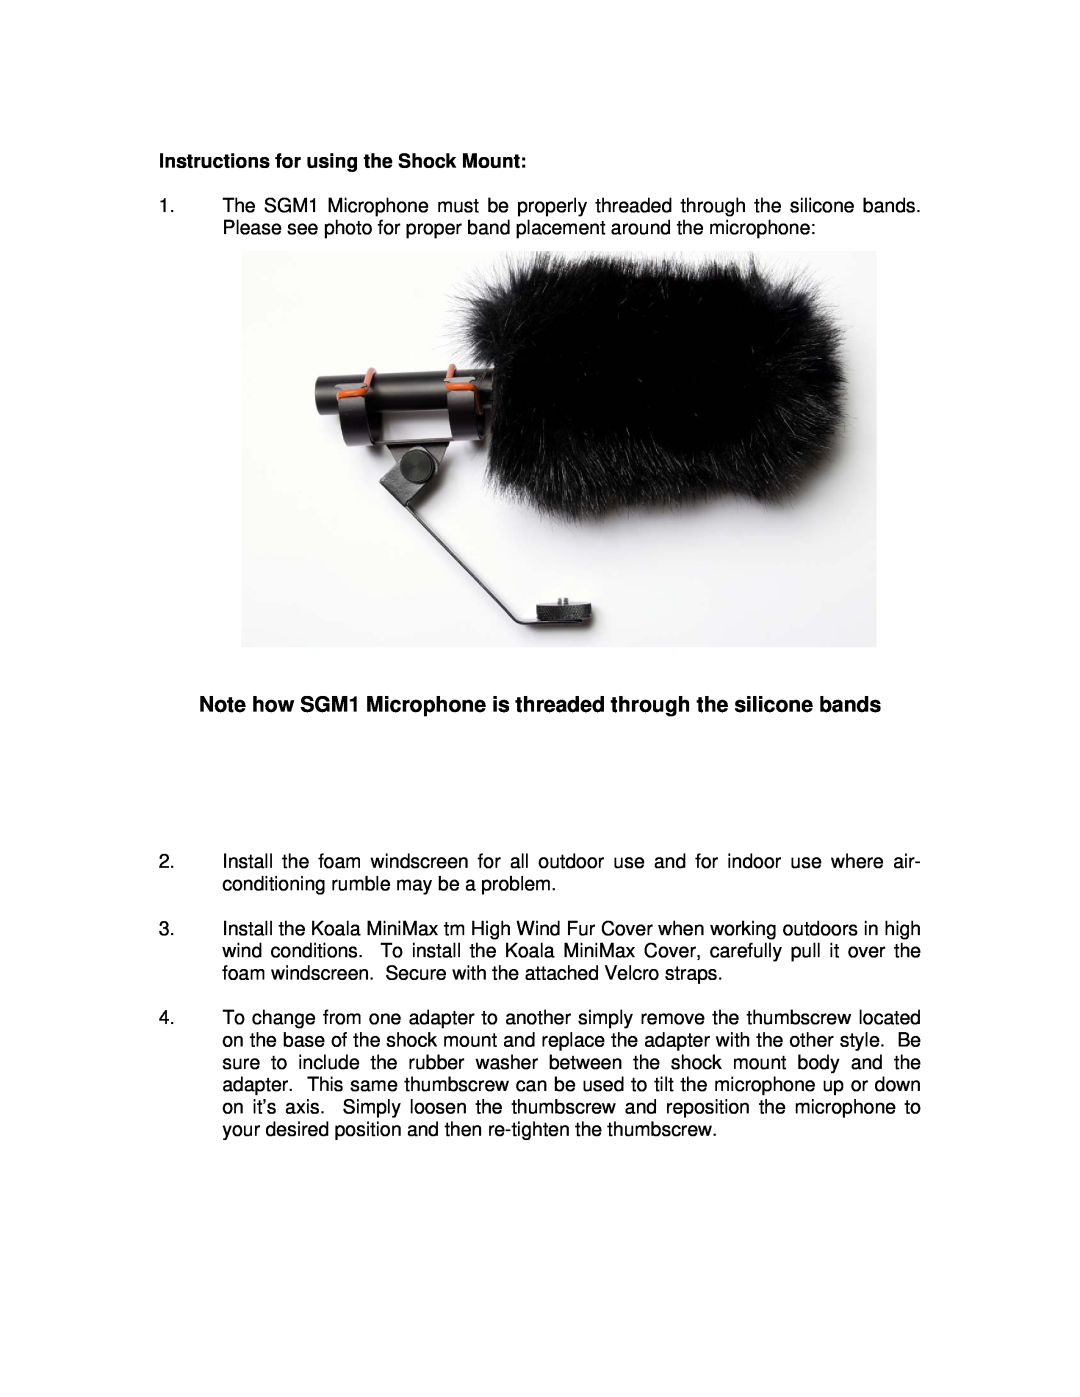 PSC manual Note how SGM1 Microphone is threaded through the silicone bands, Instructions for using the Shock Mount 